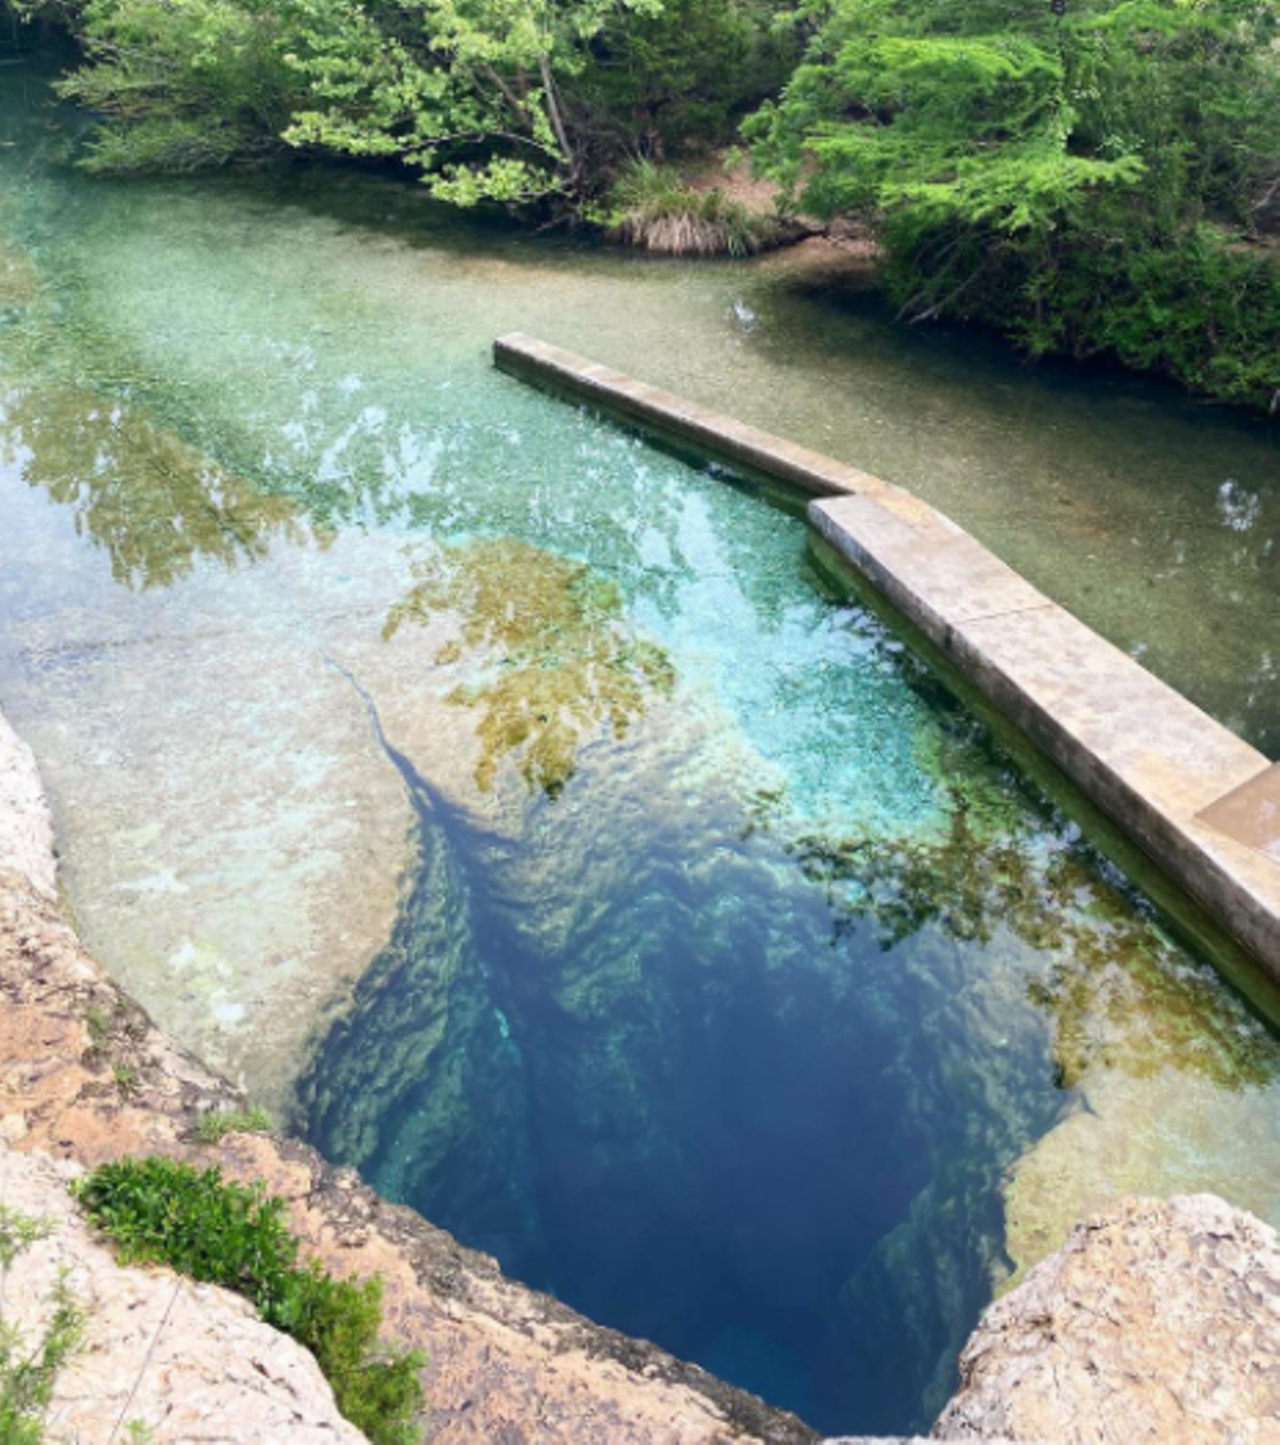 Jacob’s Well
1699 Mt. Sharp Road, Wimberley, (512) 214-4593, co.hays.tx.us
Secluded and small, the crystal clear waters of Jacob's Well makes for a serene swimming experience. Reservations are required to swim and recommended to be made a few weeks in advance.
Photo via Instagram / kaylashults